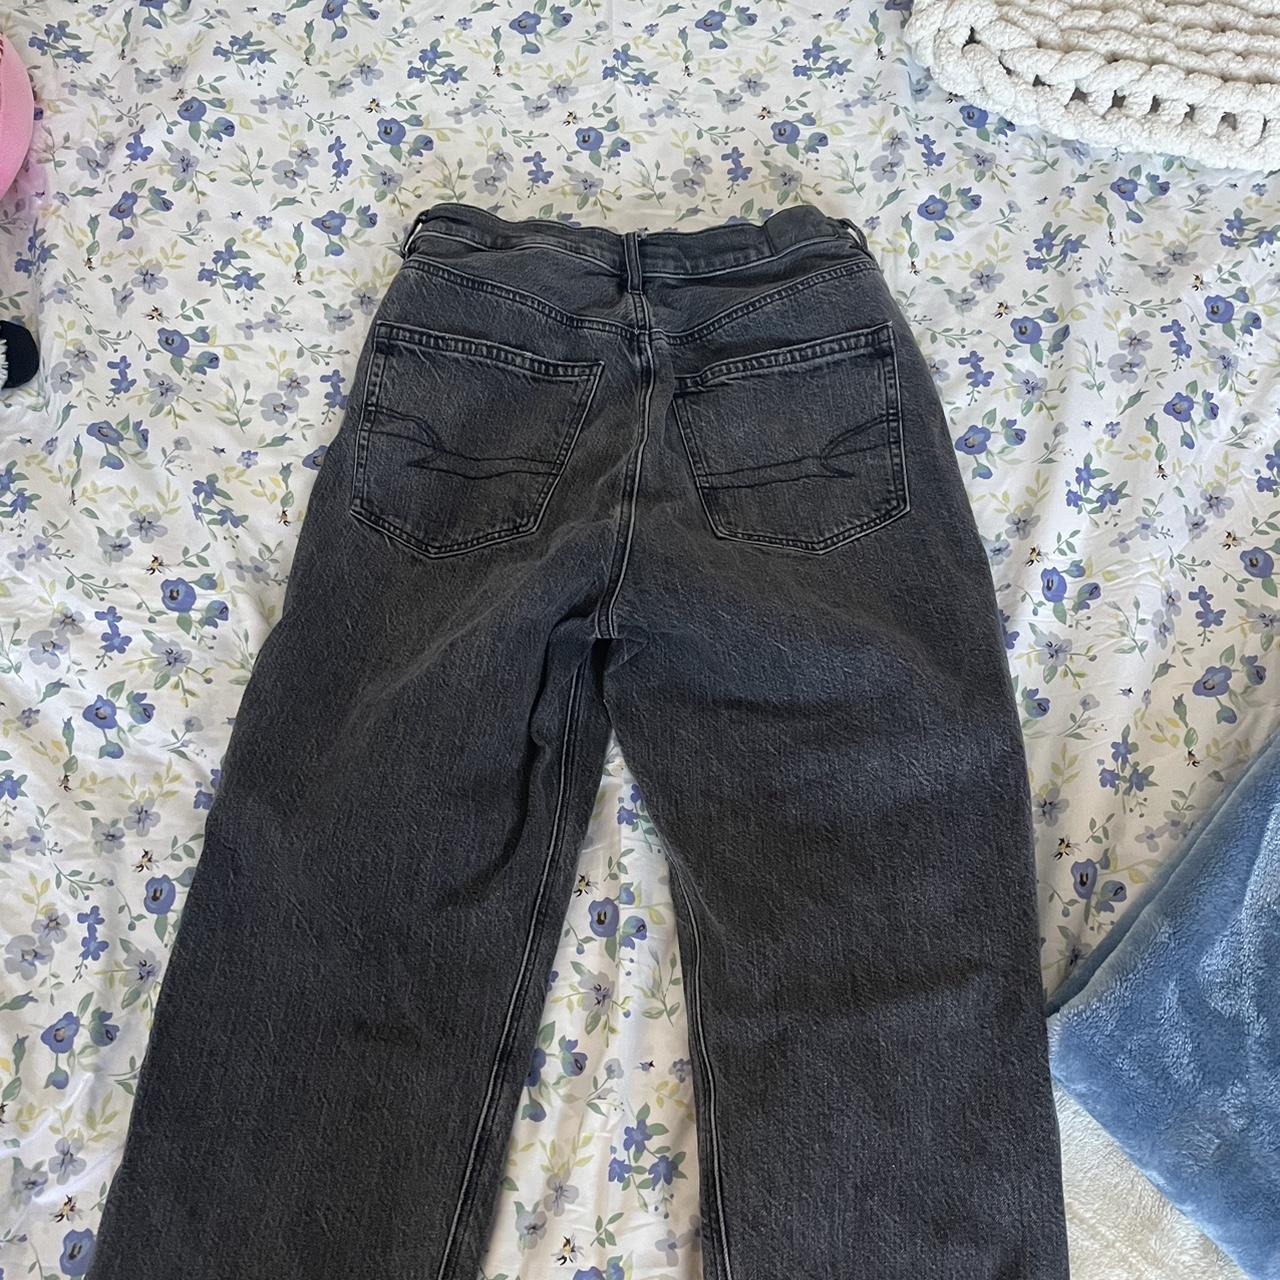 American Eagle Outfitters Women's Black Jeans (2)